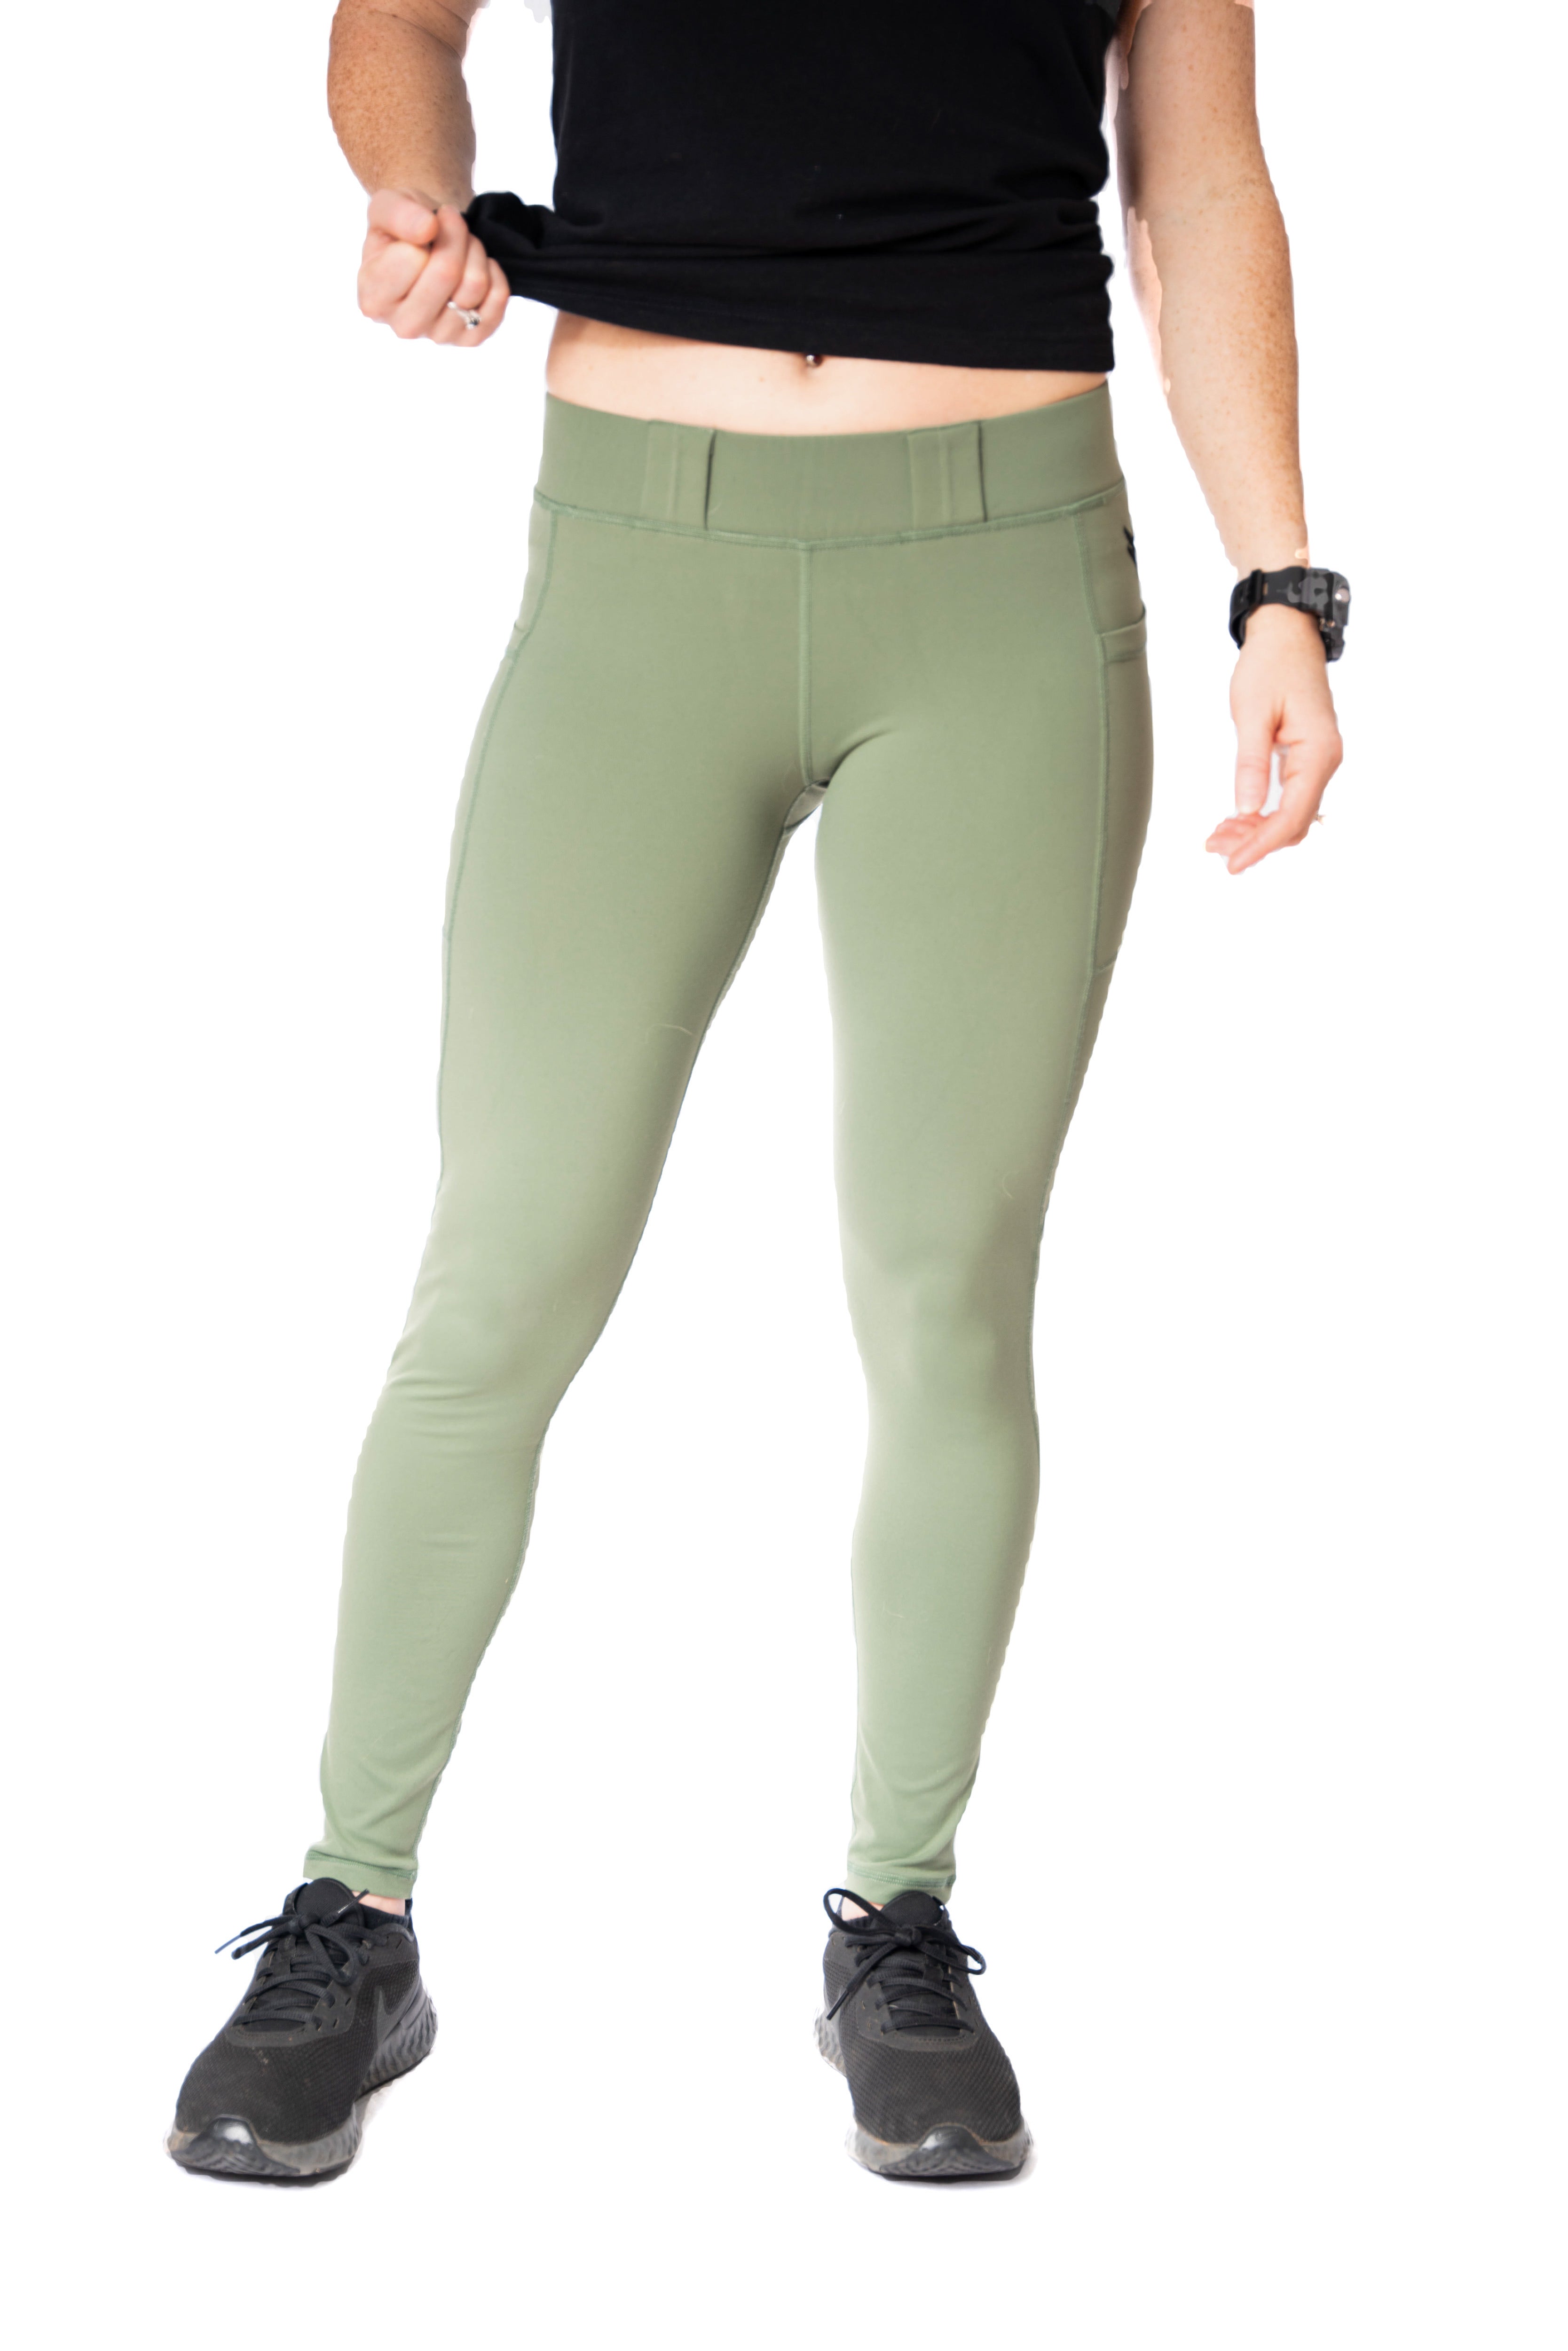 High Waist Womens Olive Green Yoga Leggings With Pockets Sexy And Stretchy  Fitness Pants For Summer Sports XL Size From Bidalina, $5.89 | DHgate.Com